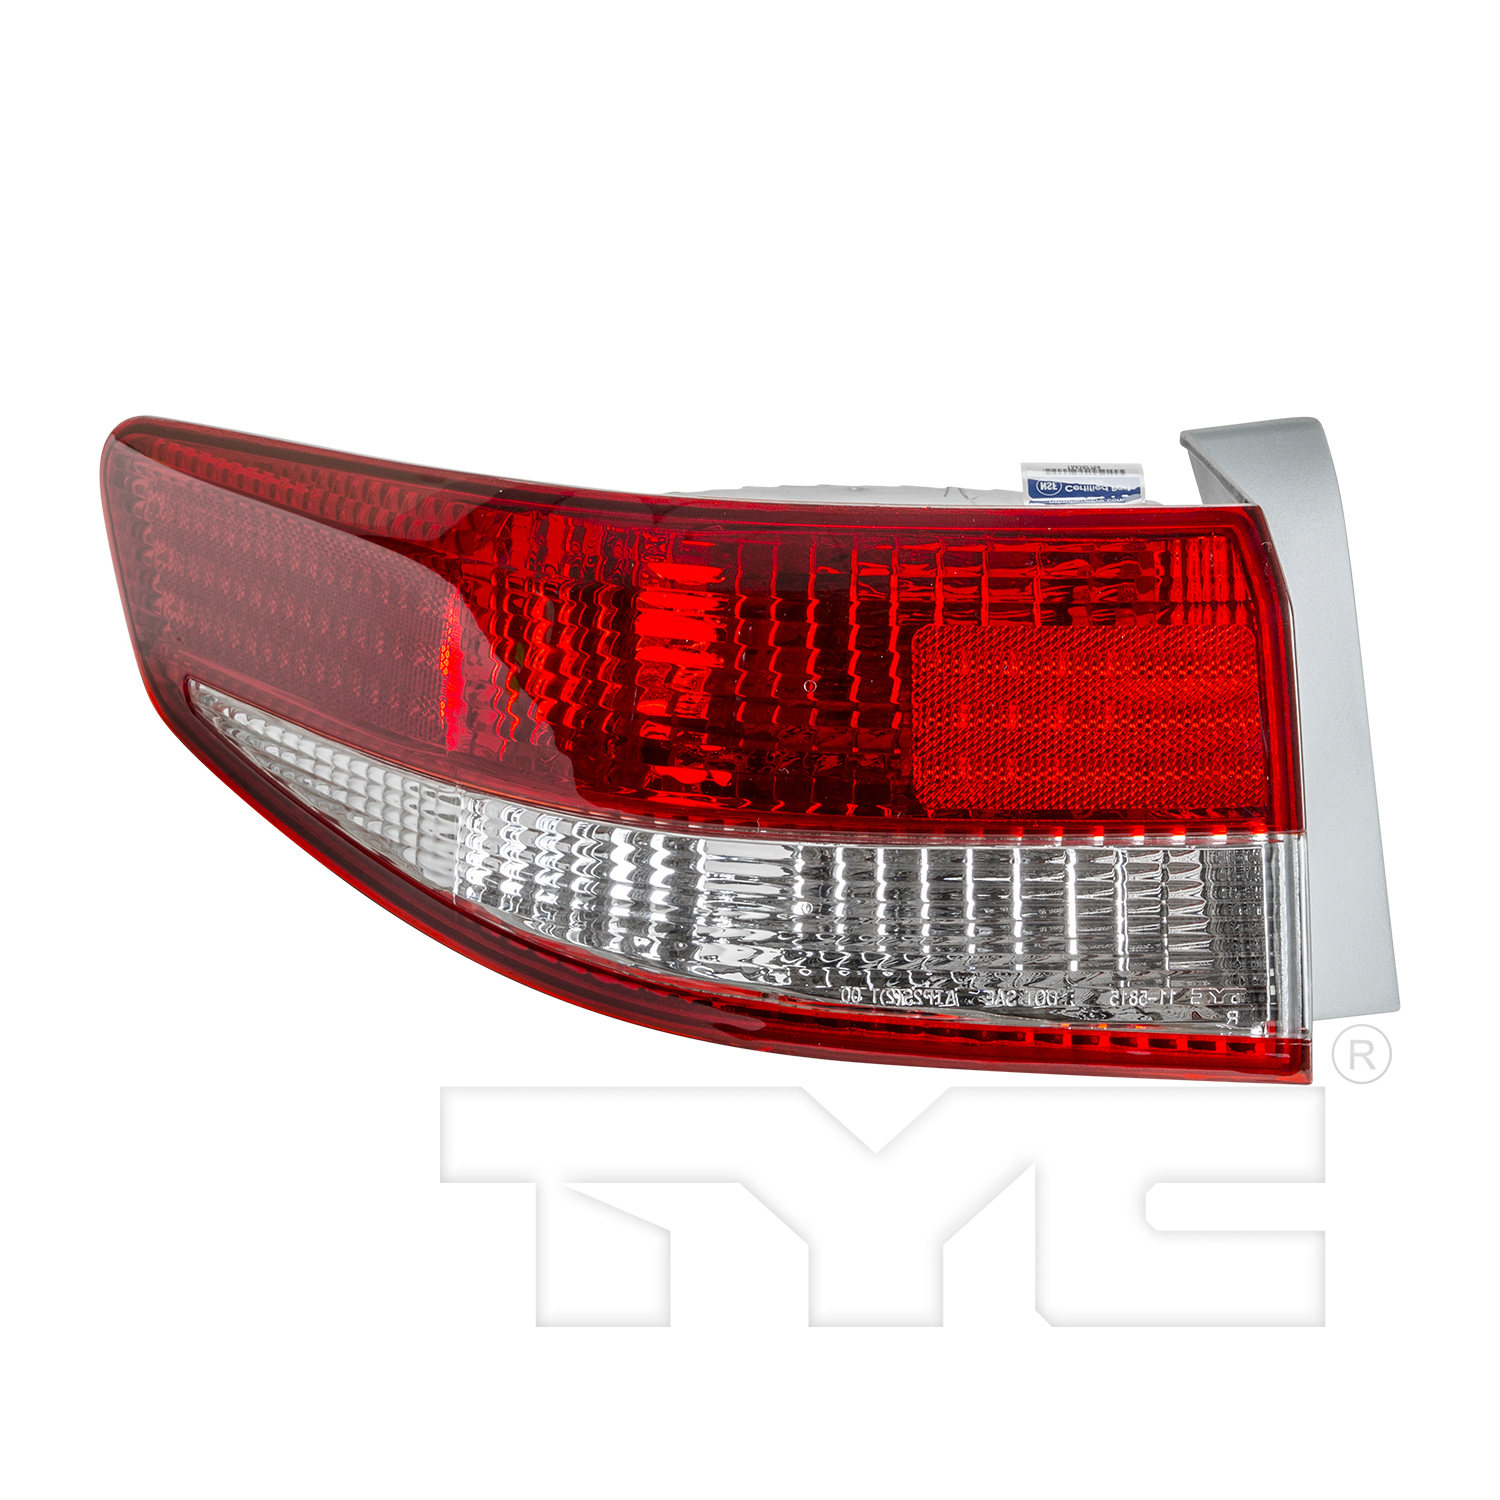 Aftermarket TAILLIGHTS for HONDA - ACCORD, ACCORD,03-04,LT Taillamp assy